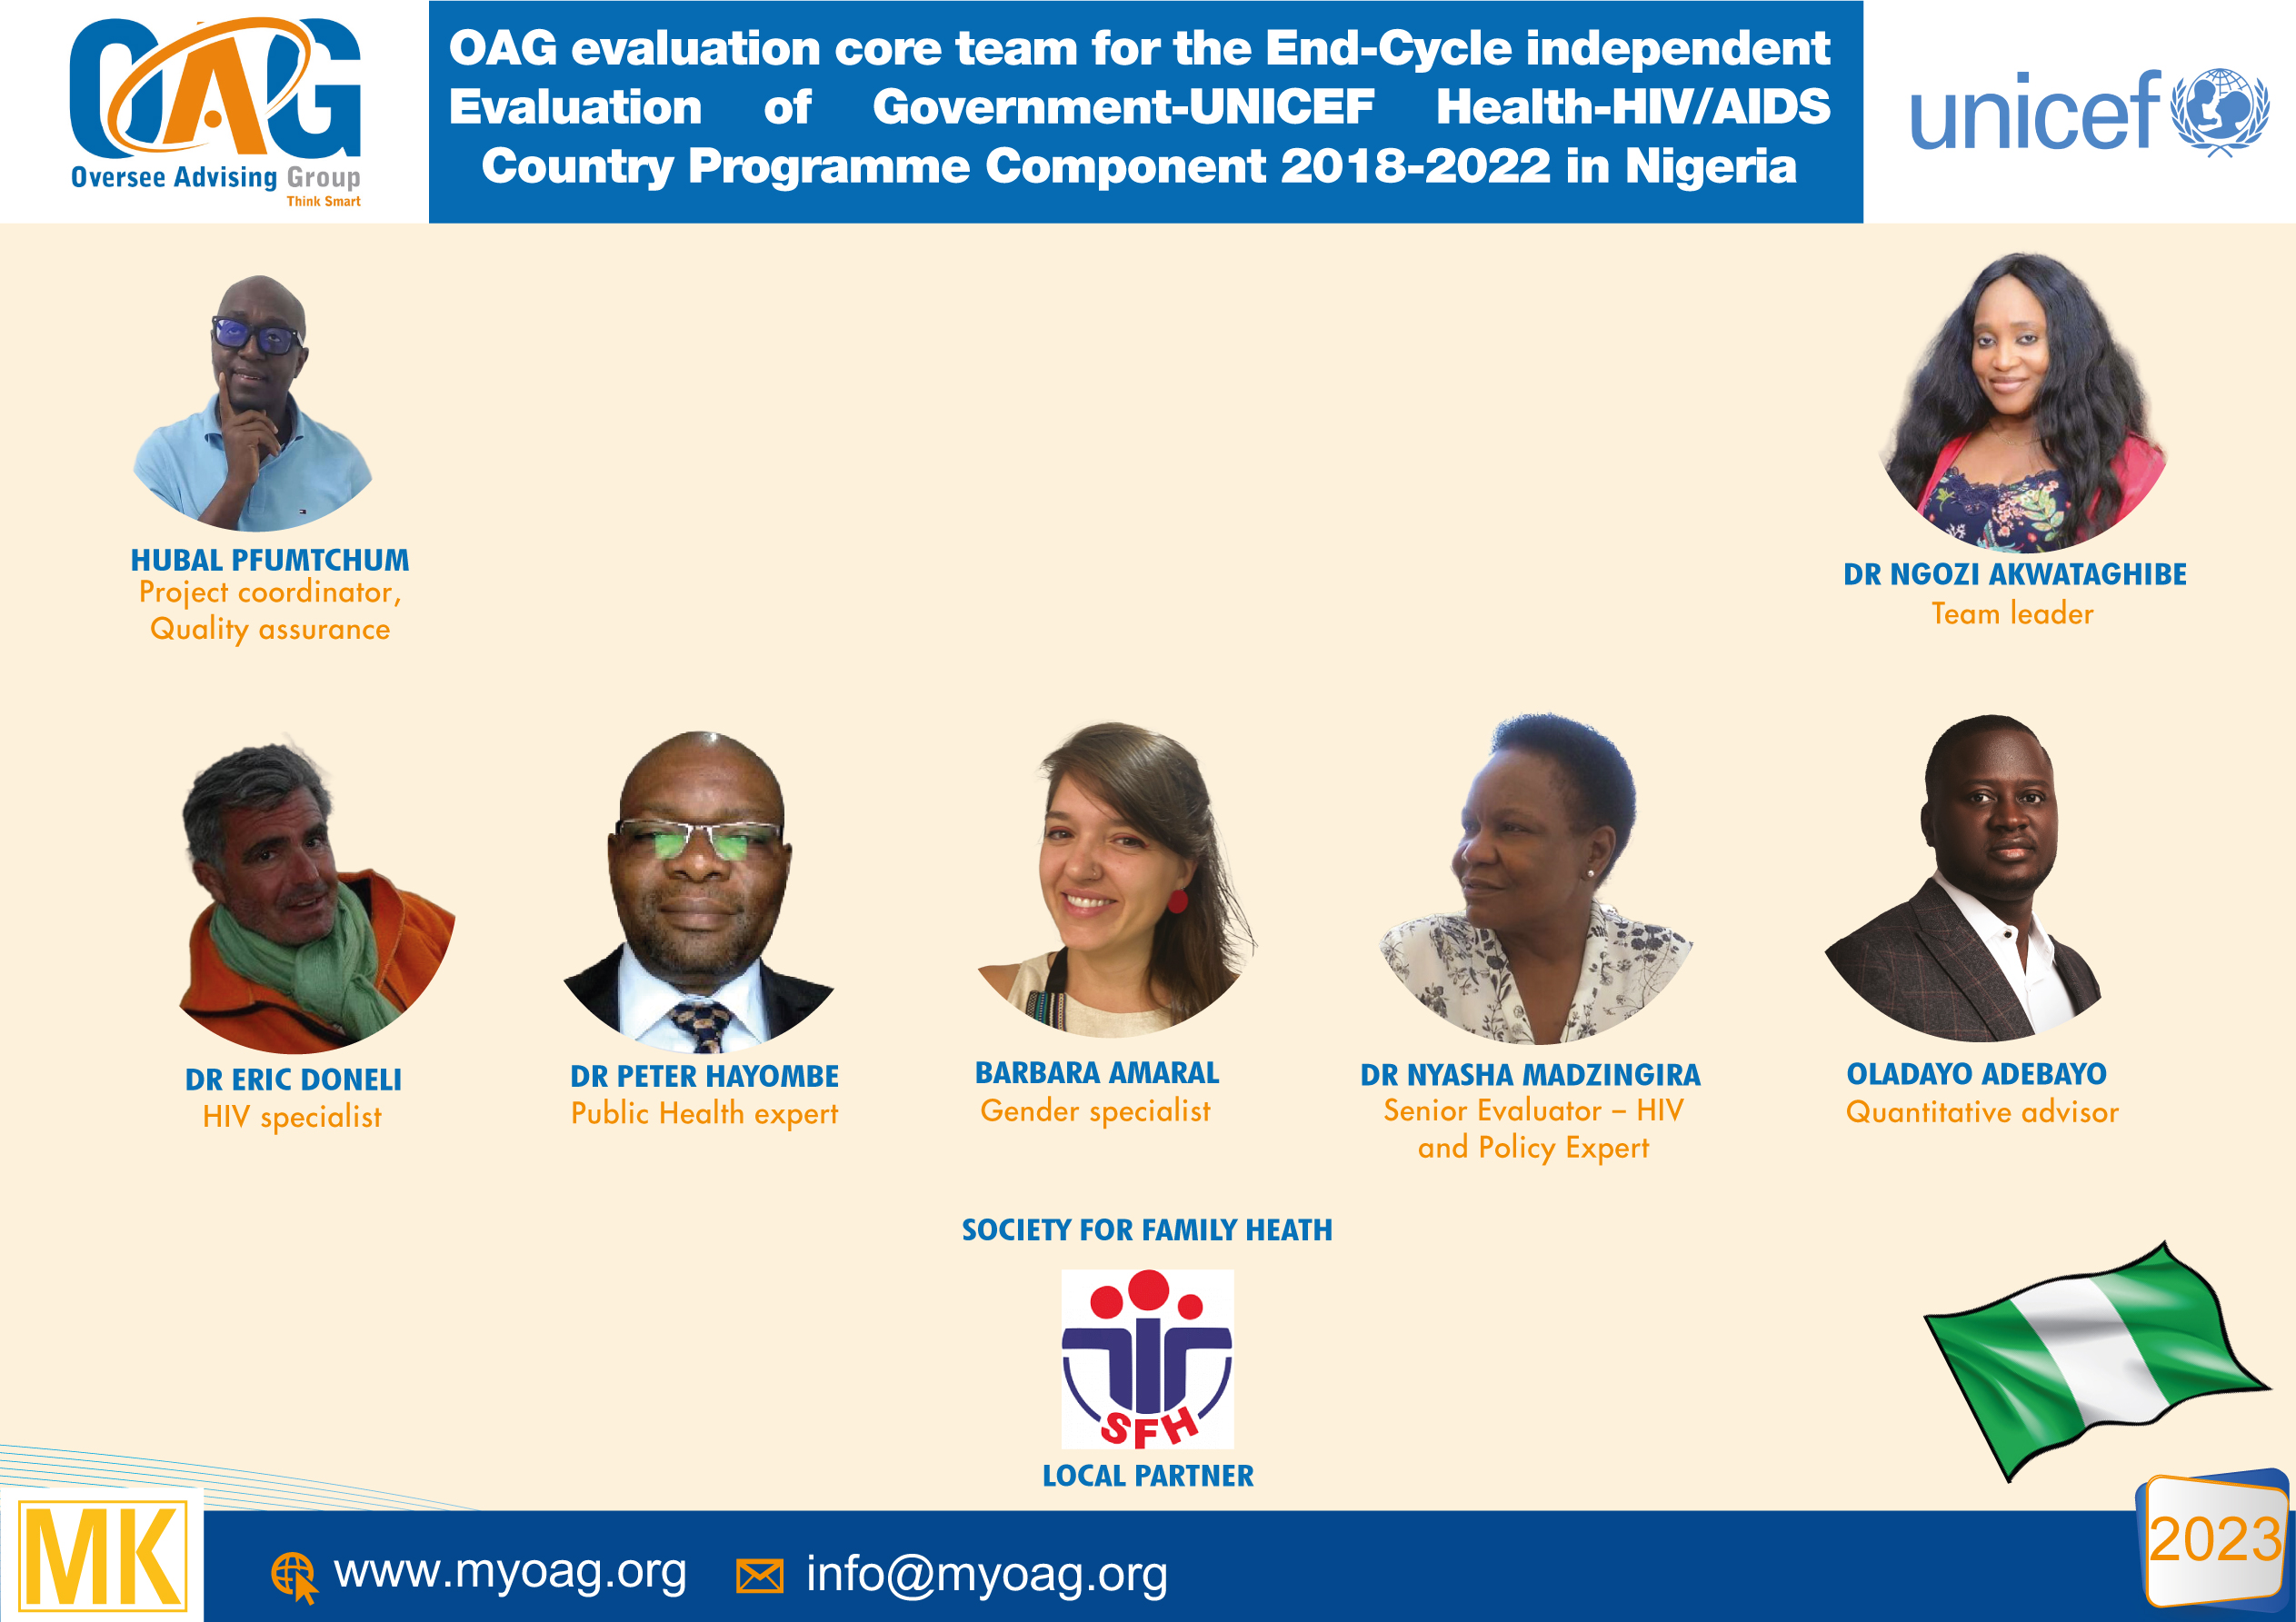 This is OAG team for the End-Cycle Independent Evaluation of Government-UNICEF Health-HIV/AIDS Country Programme Component 2018-2022 in Nigeria